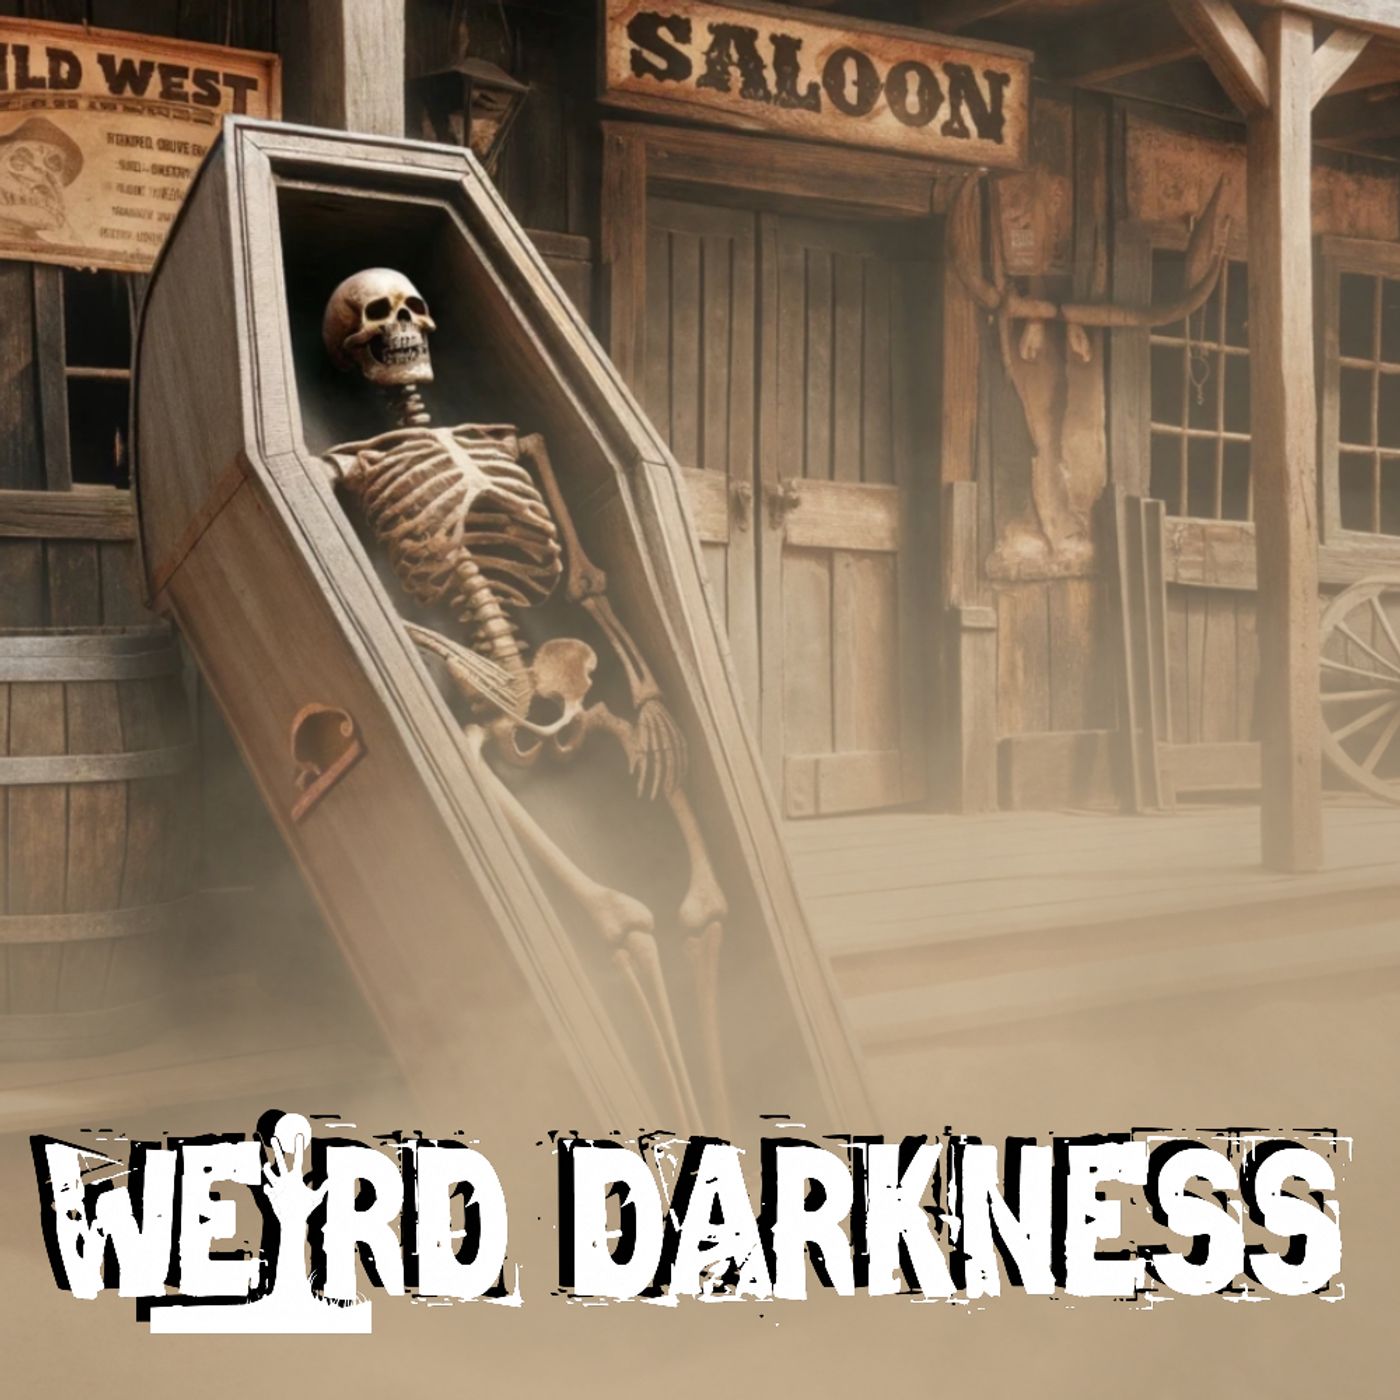 “TO DIE IN THE OLD WEST” and More Creepy True Tales! #WeirdDarkness